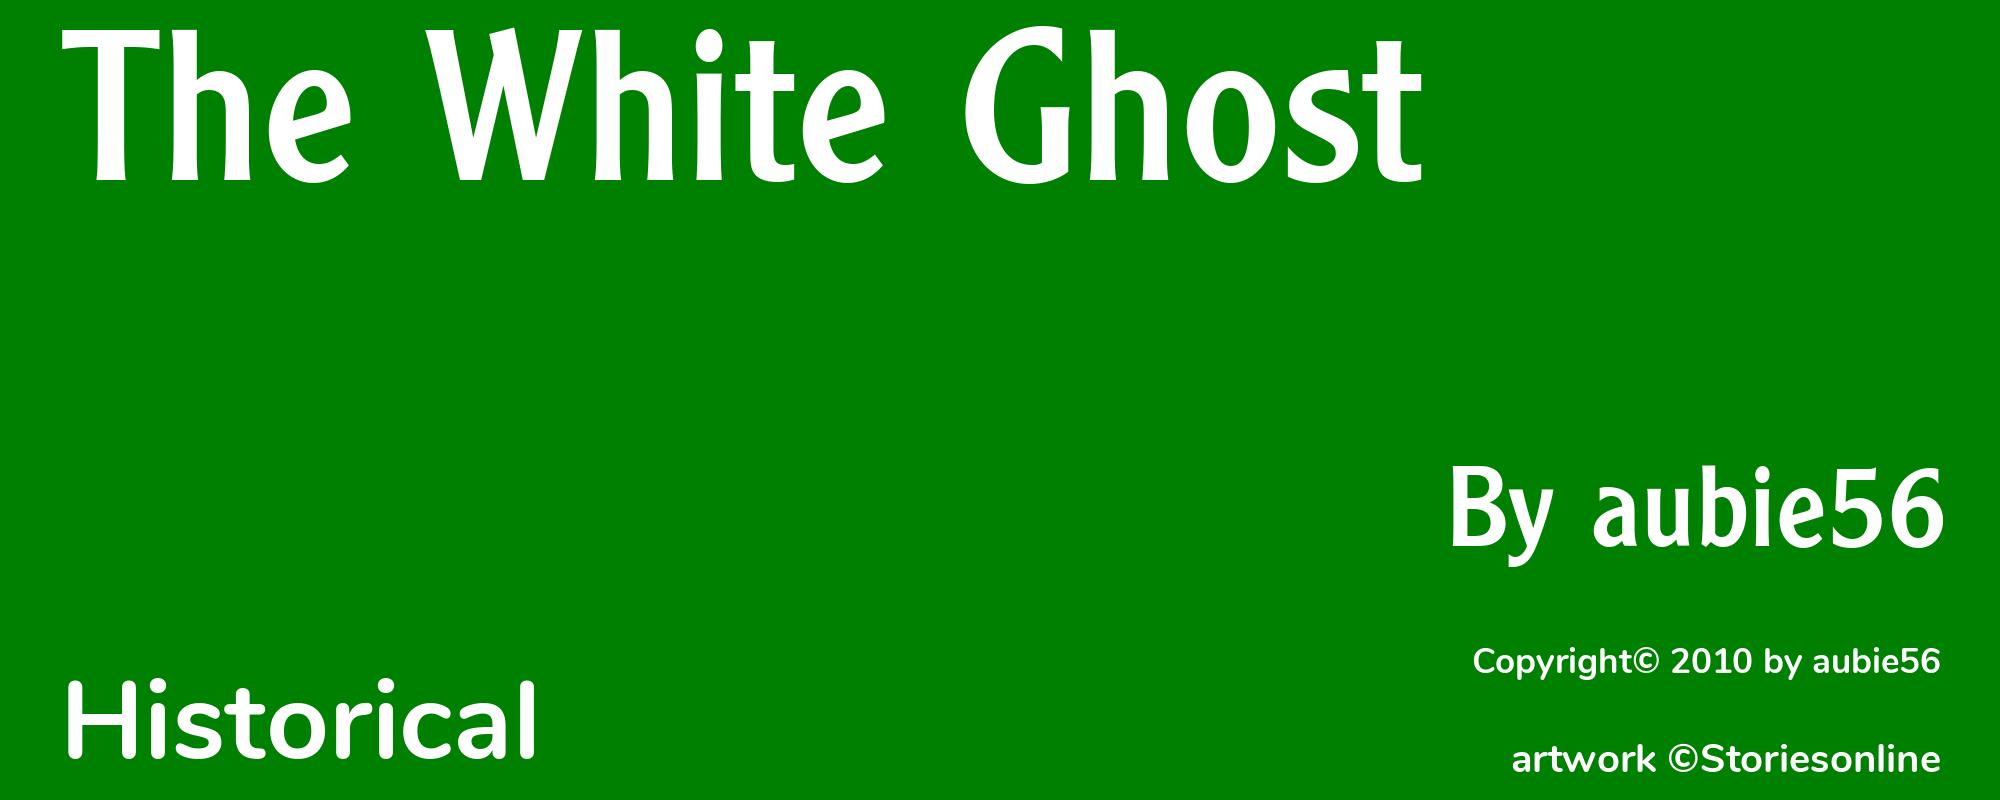 The White Ghost - Cover